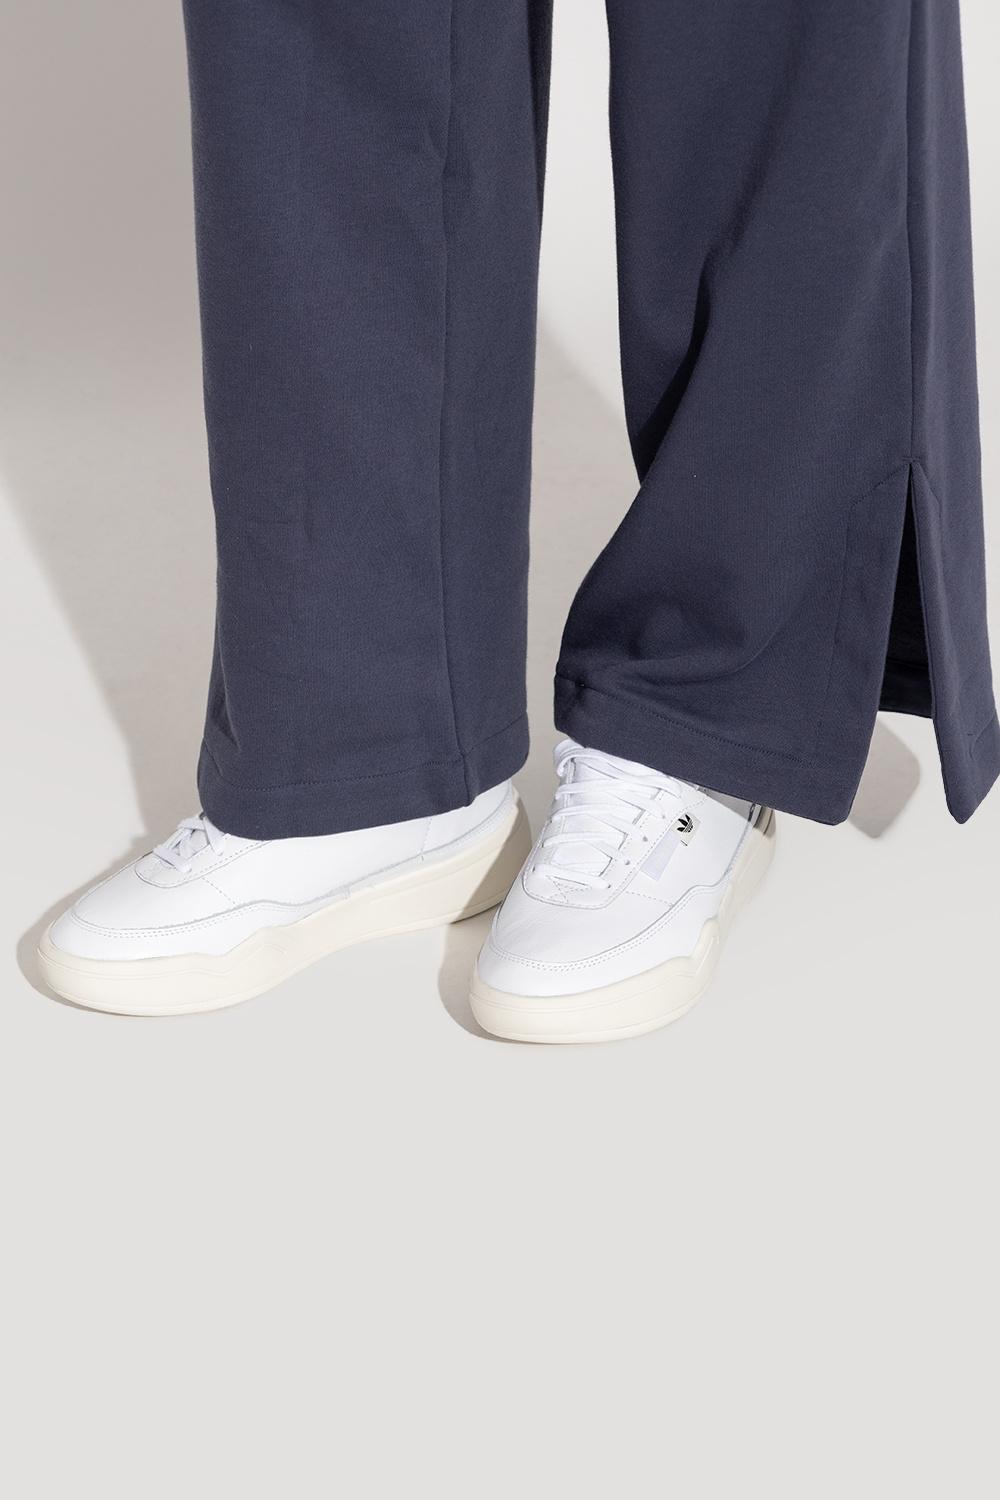 adidas Originals 'her Court' Sneakers in White | Lyst